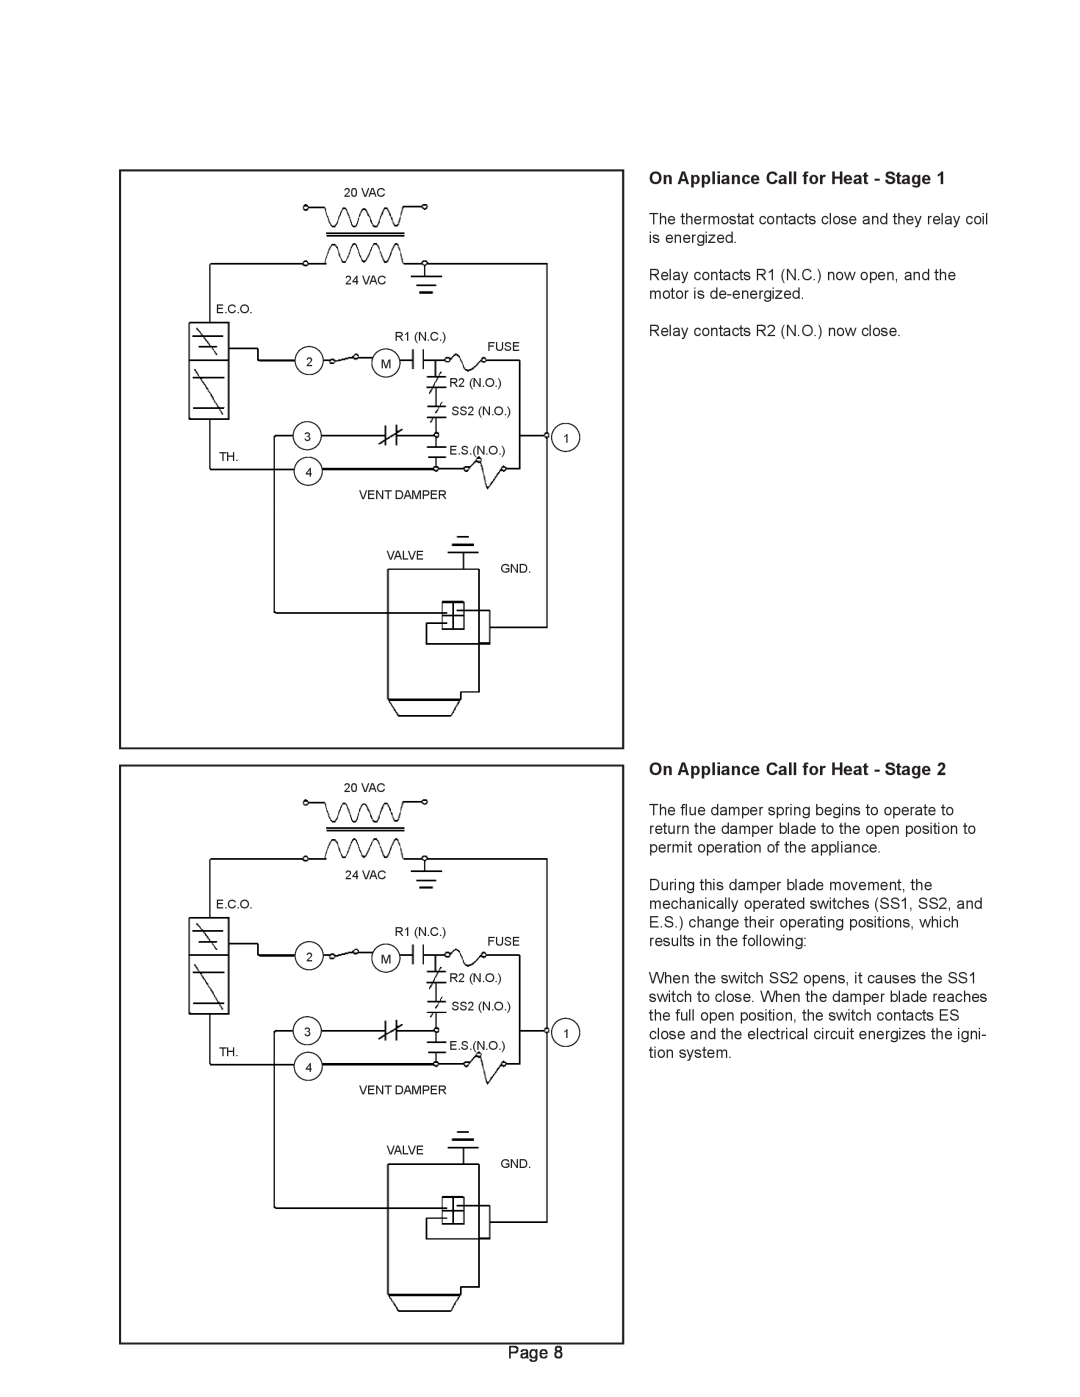 GSW G65 instruction manual On Appliance Call for Heat - Stage 